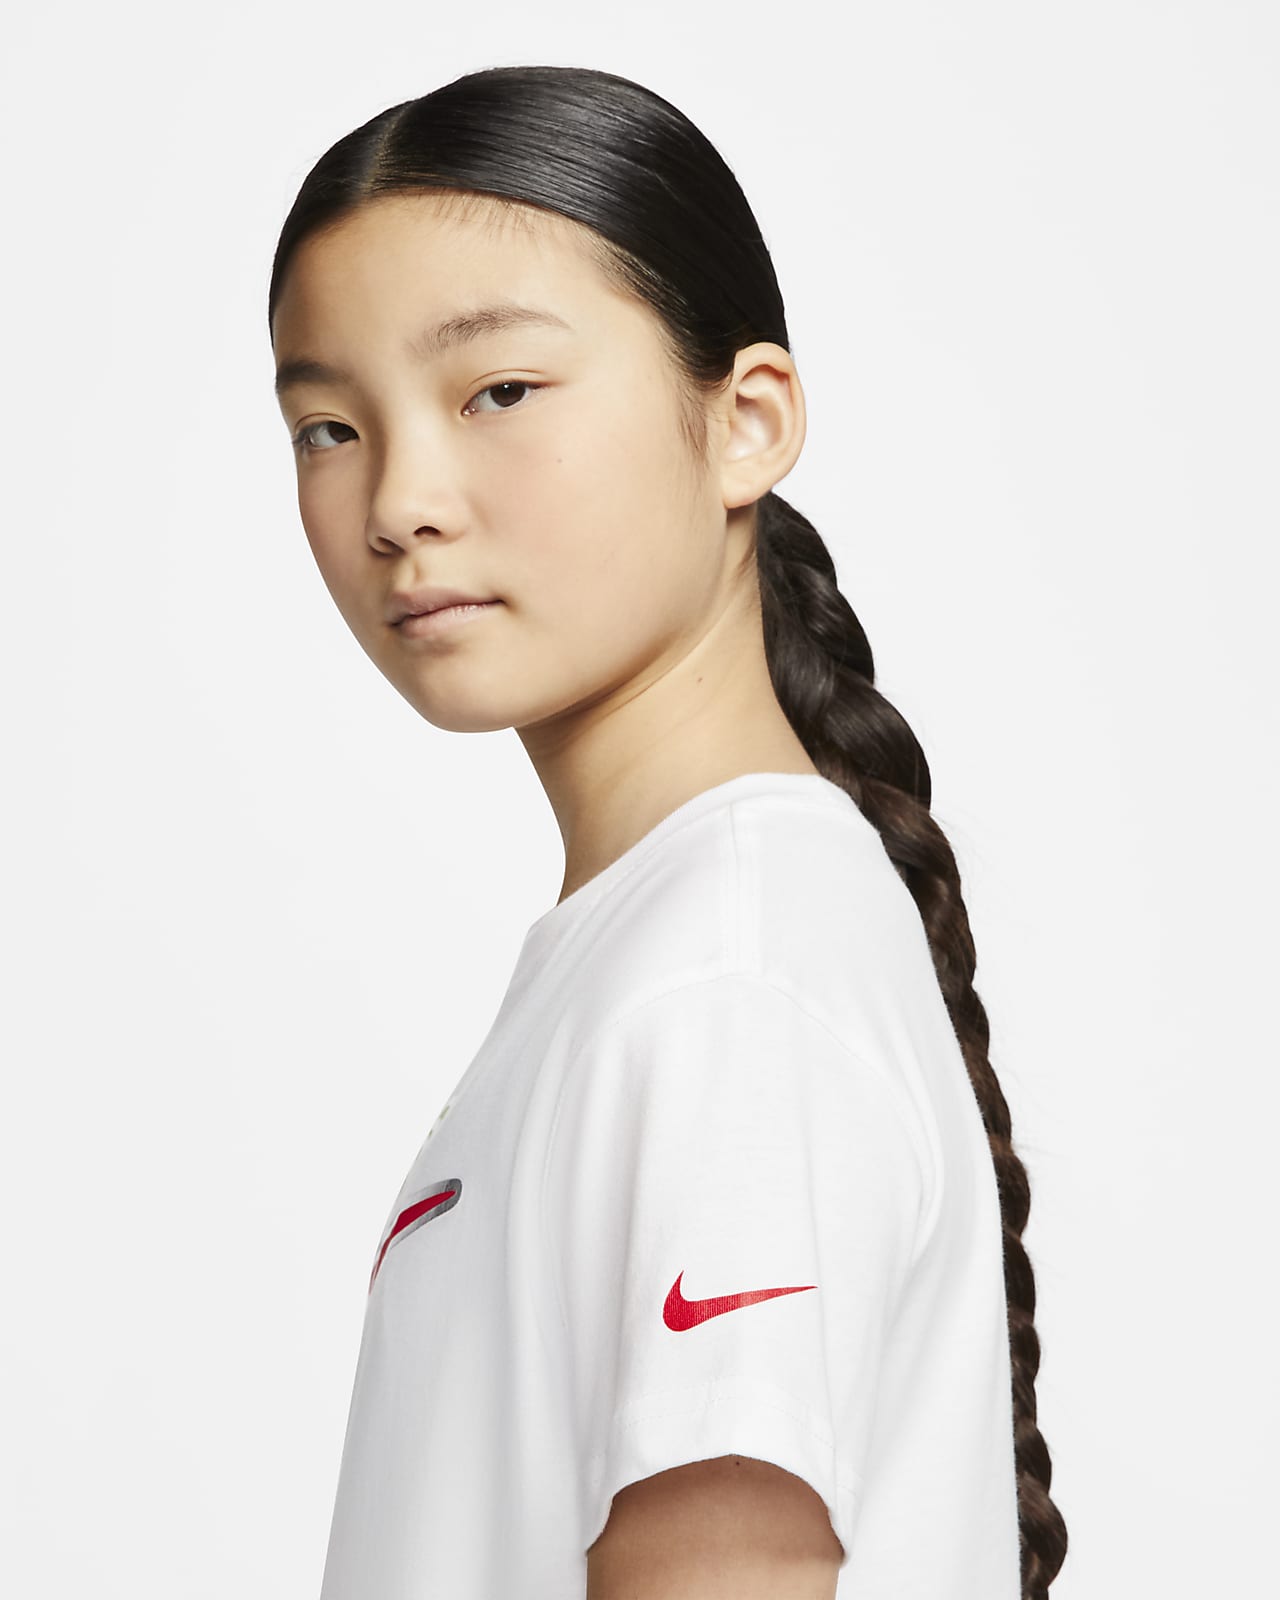 nike youth girl clothes